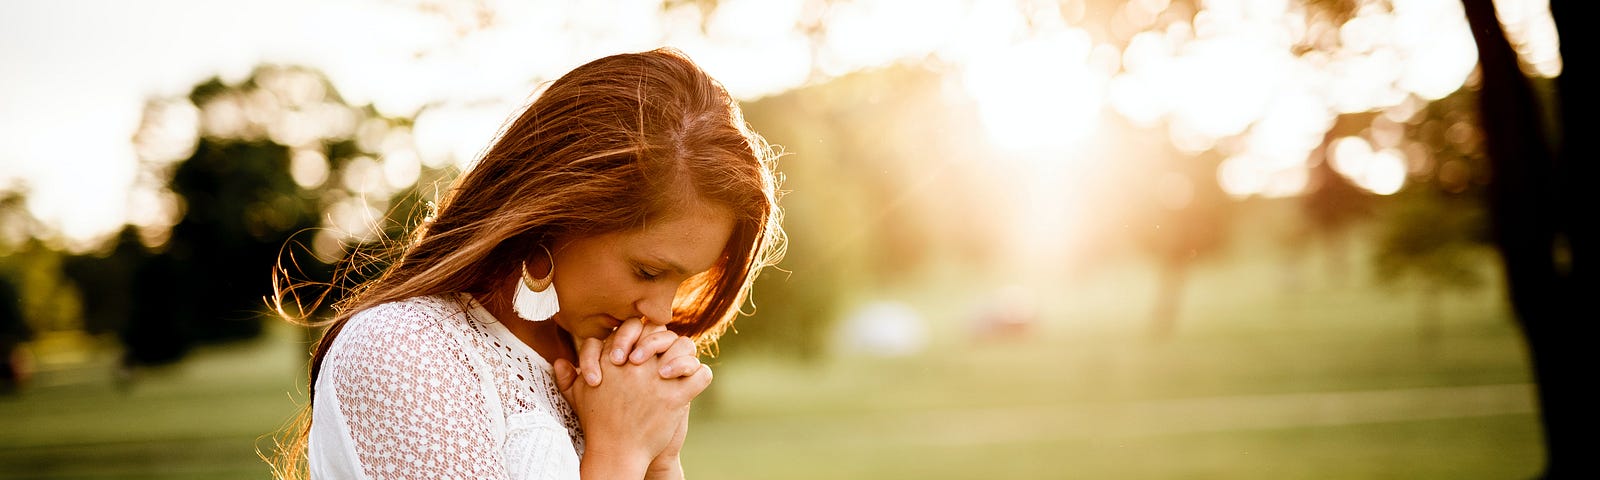 Woman with hands by her faith showing the power of forgiveness